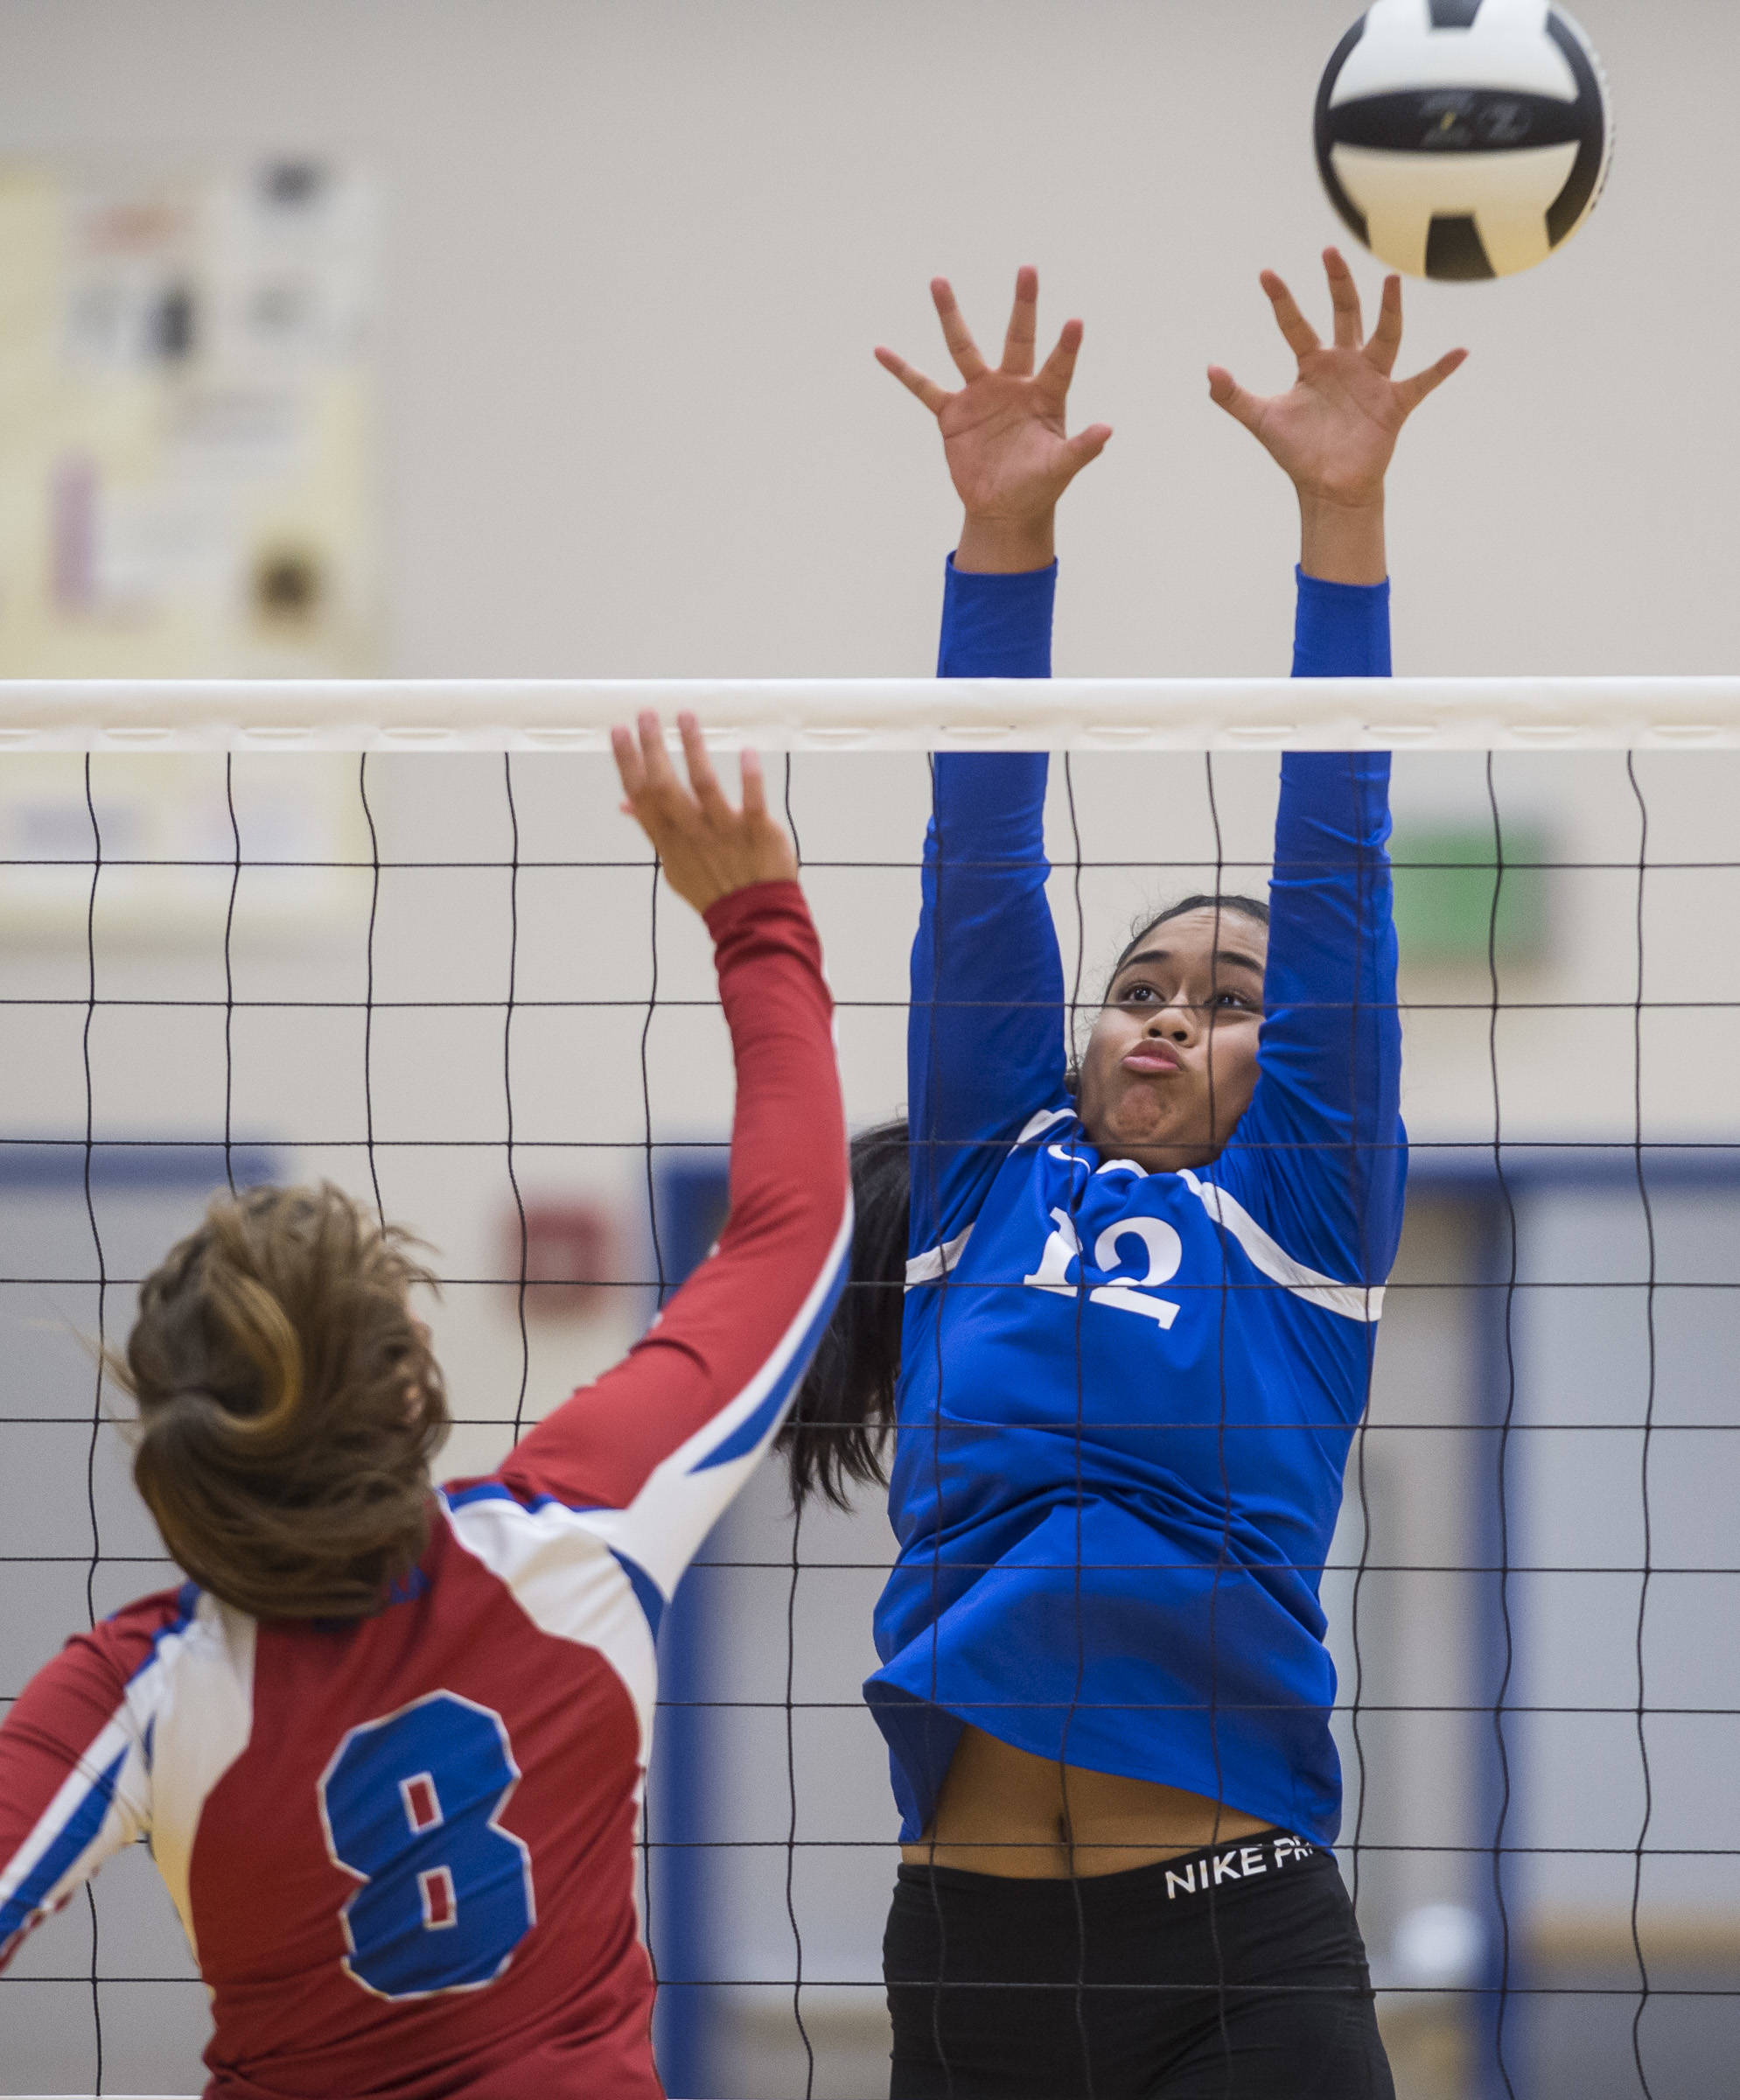 Thunder Mountain’s Mariah Tanuvasa-Tuvaifale, right, attempts to block a shot by Sitka’s Avery Voron at Thunder Mountain High School on Friday, Sept. 7, 2018. Thunder Mountain won 3-0 (25-15, 25-21, 25-16). (Michael Penn | Juneau Empire)